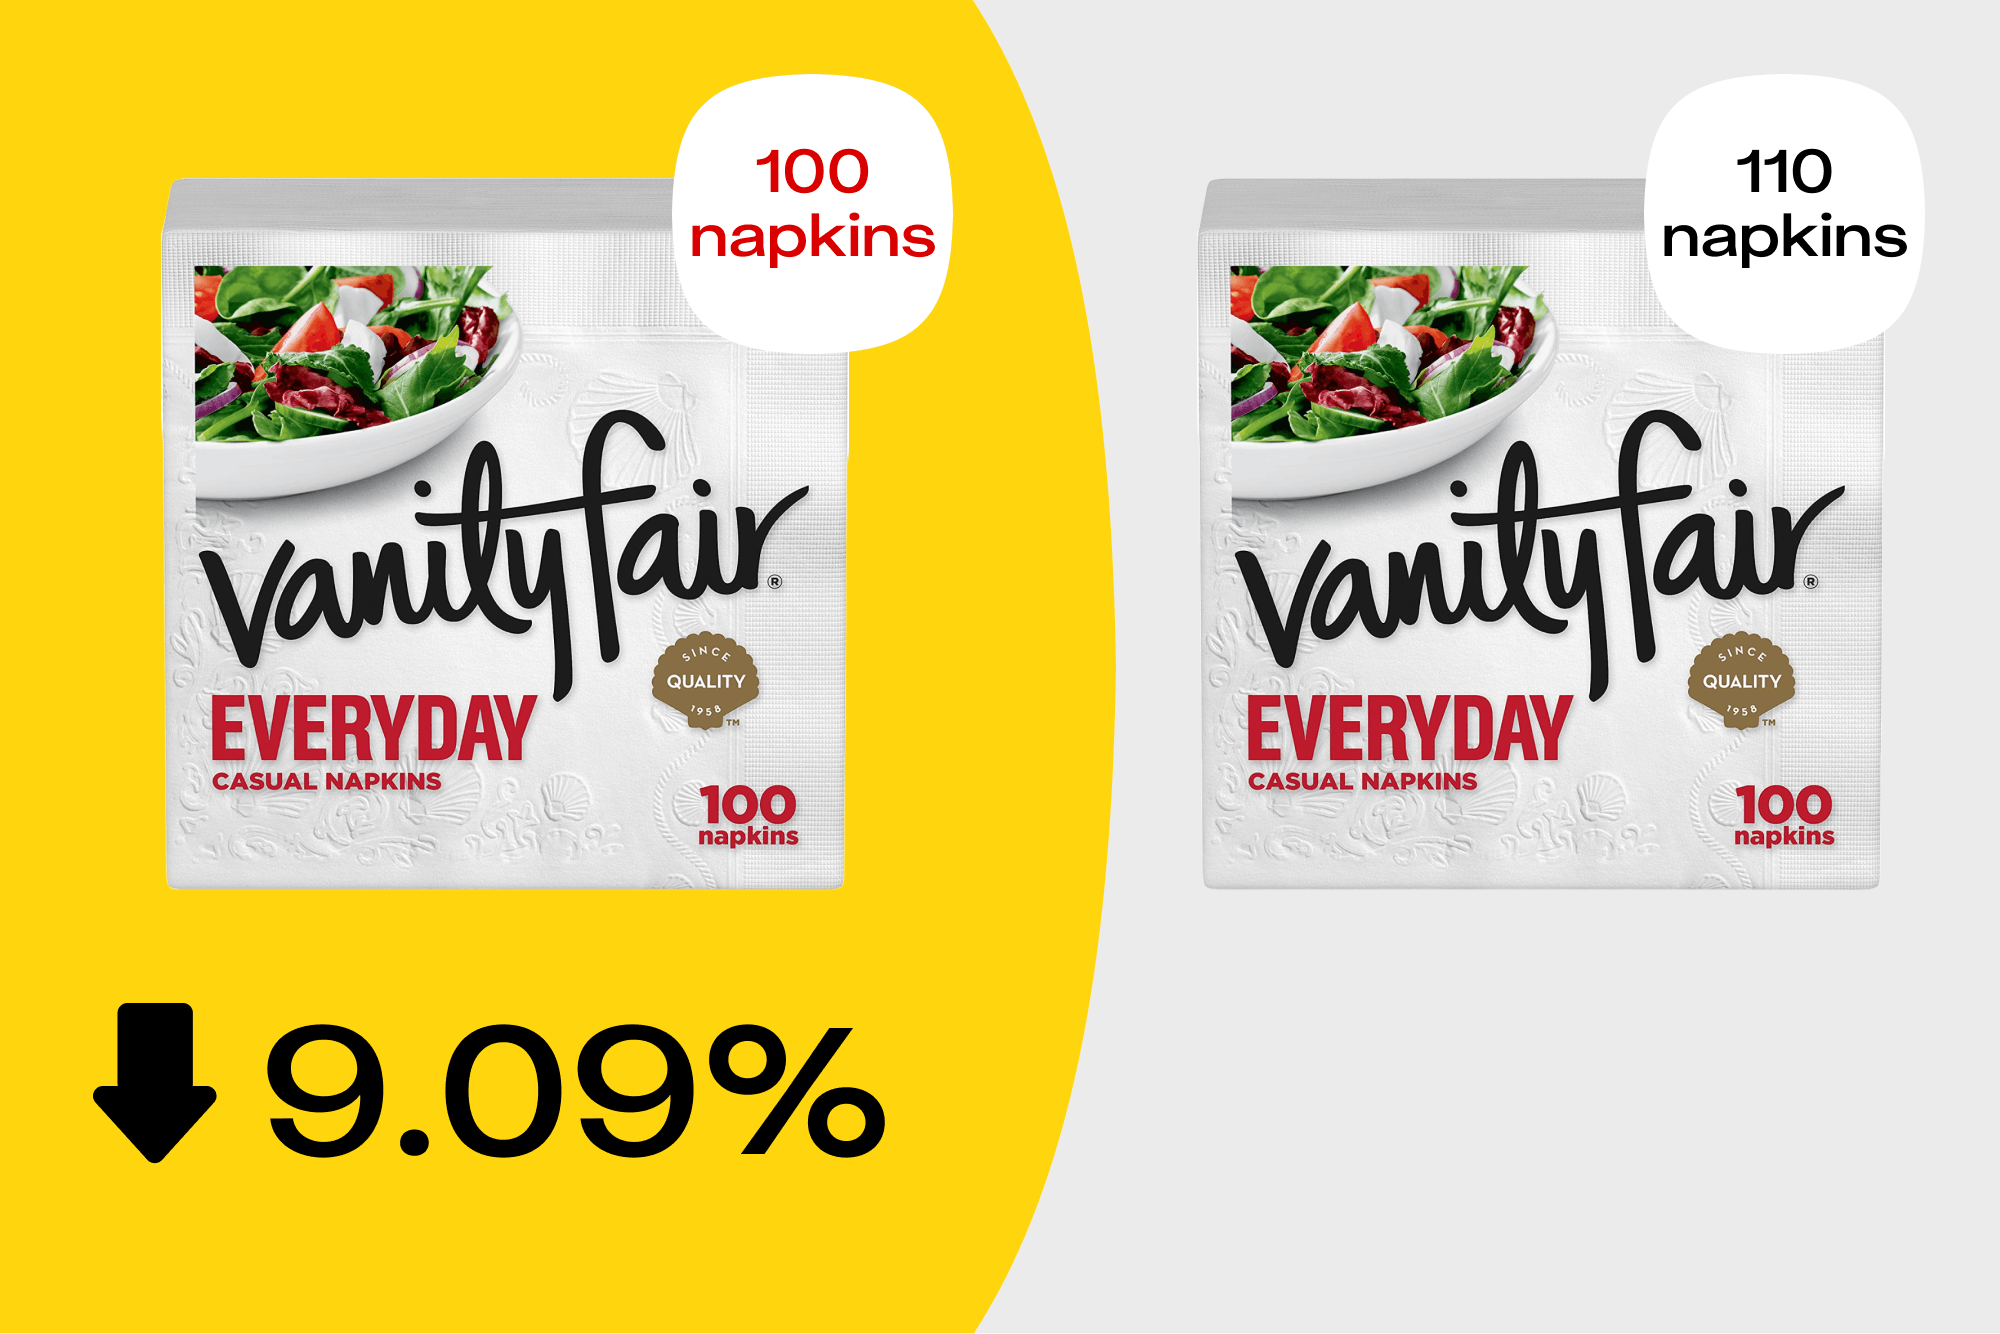 Graphic showing how Vanity Fair napkins are now 9.09% smaller thanks to shrinkflation